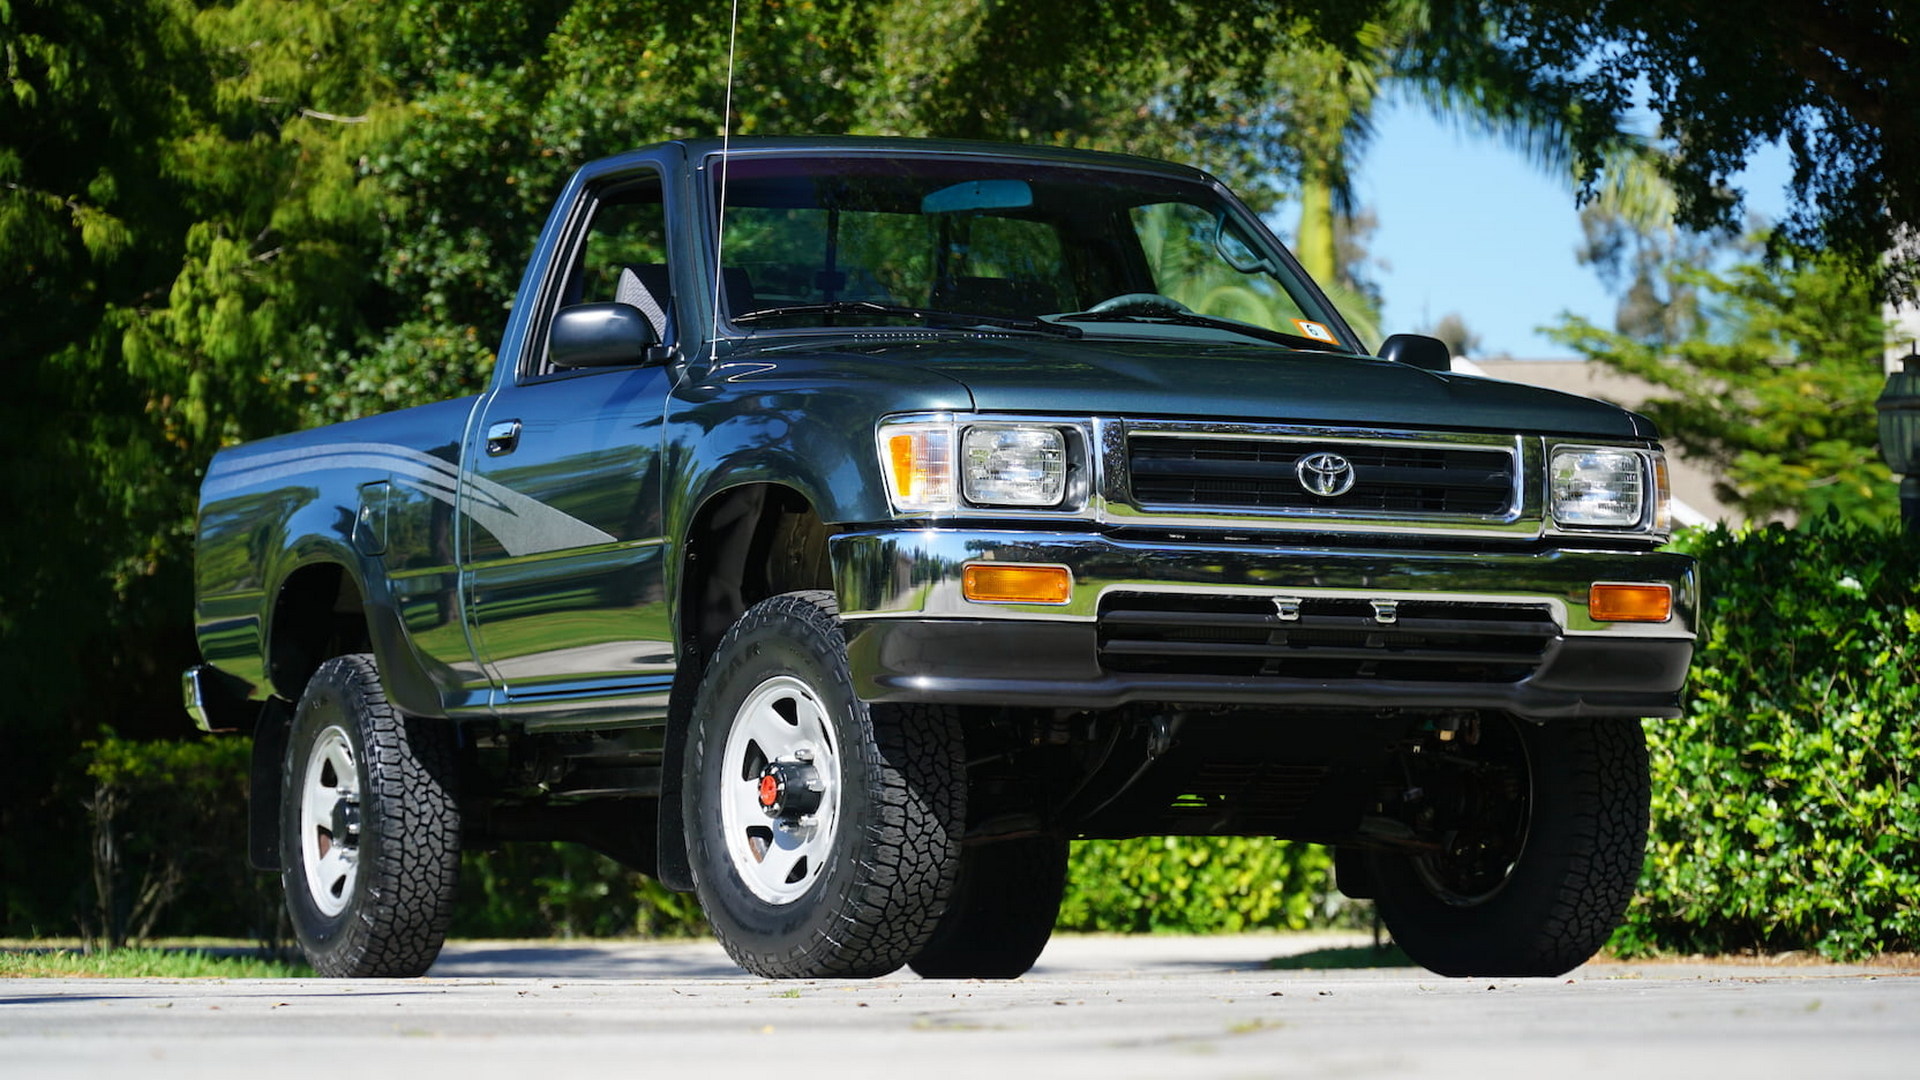 A Forest Green 1993 Toyota Pickup Truck parked outside, it has only 94 miles and could be worth a lot of money.